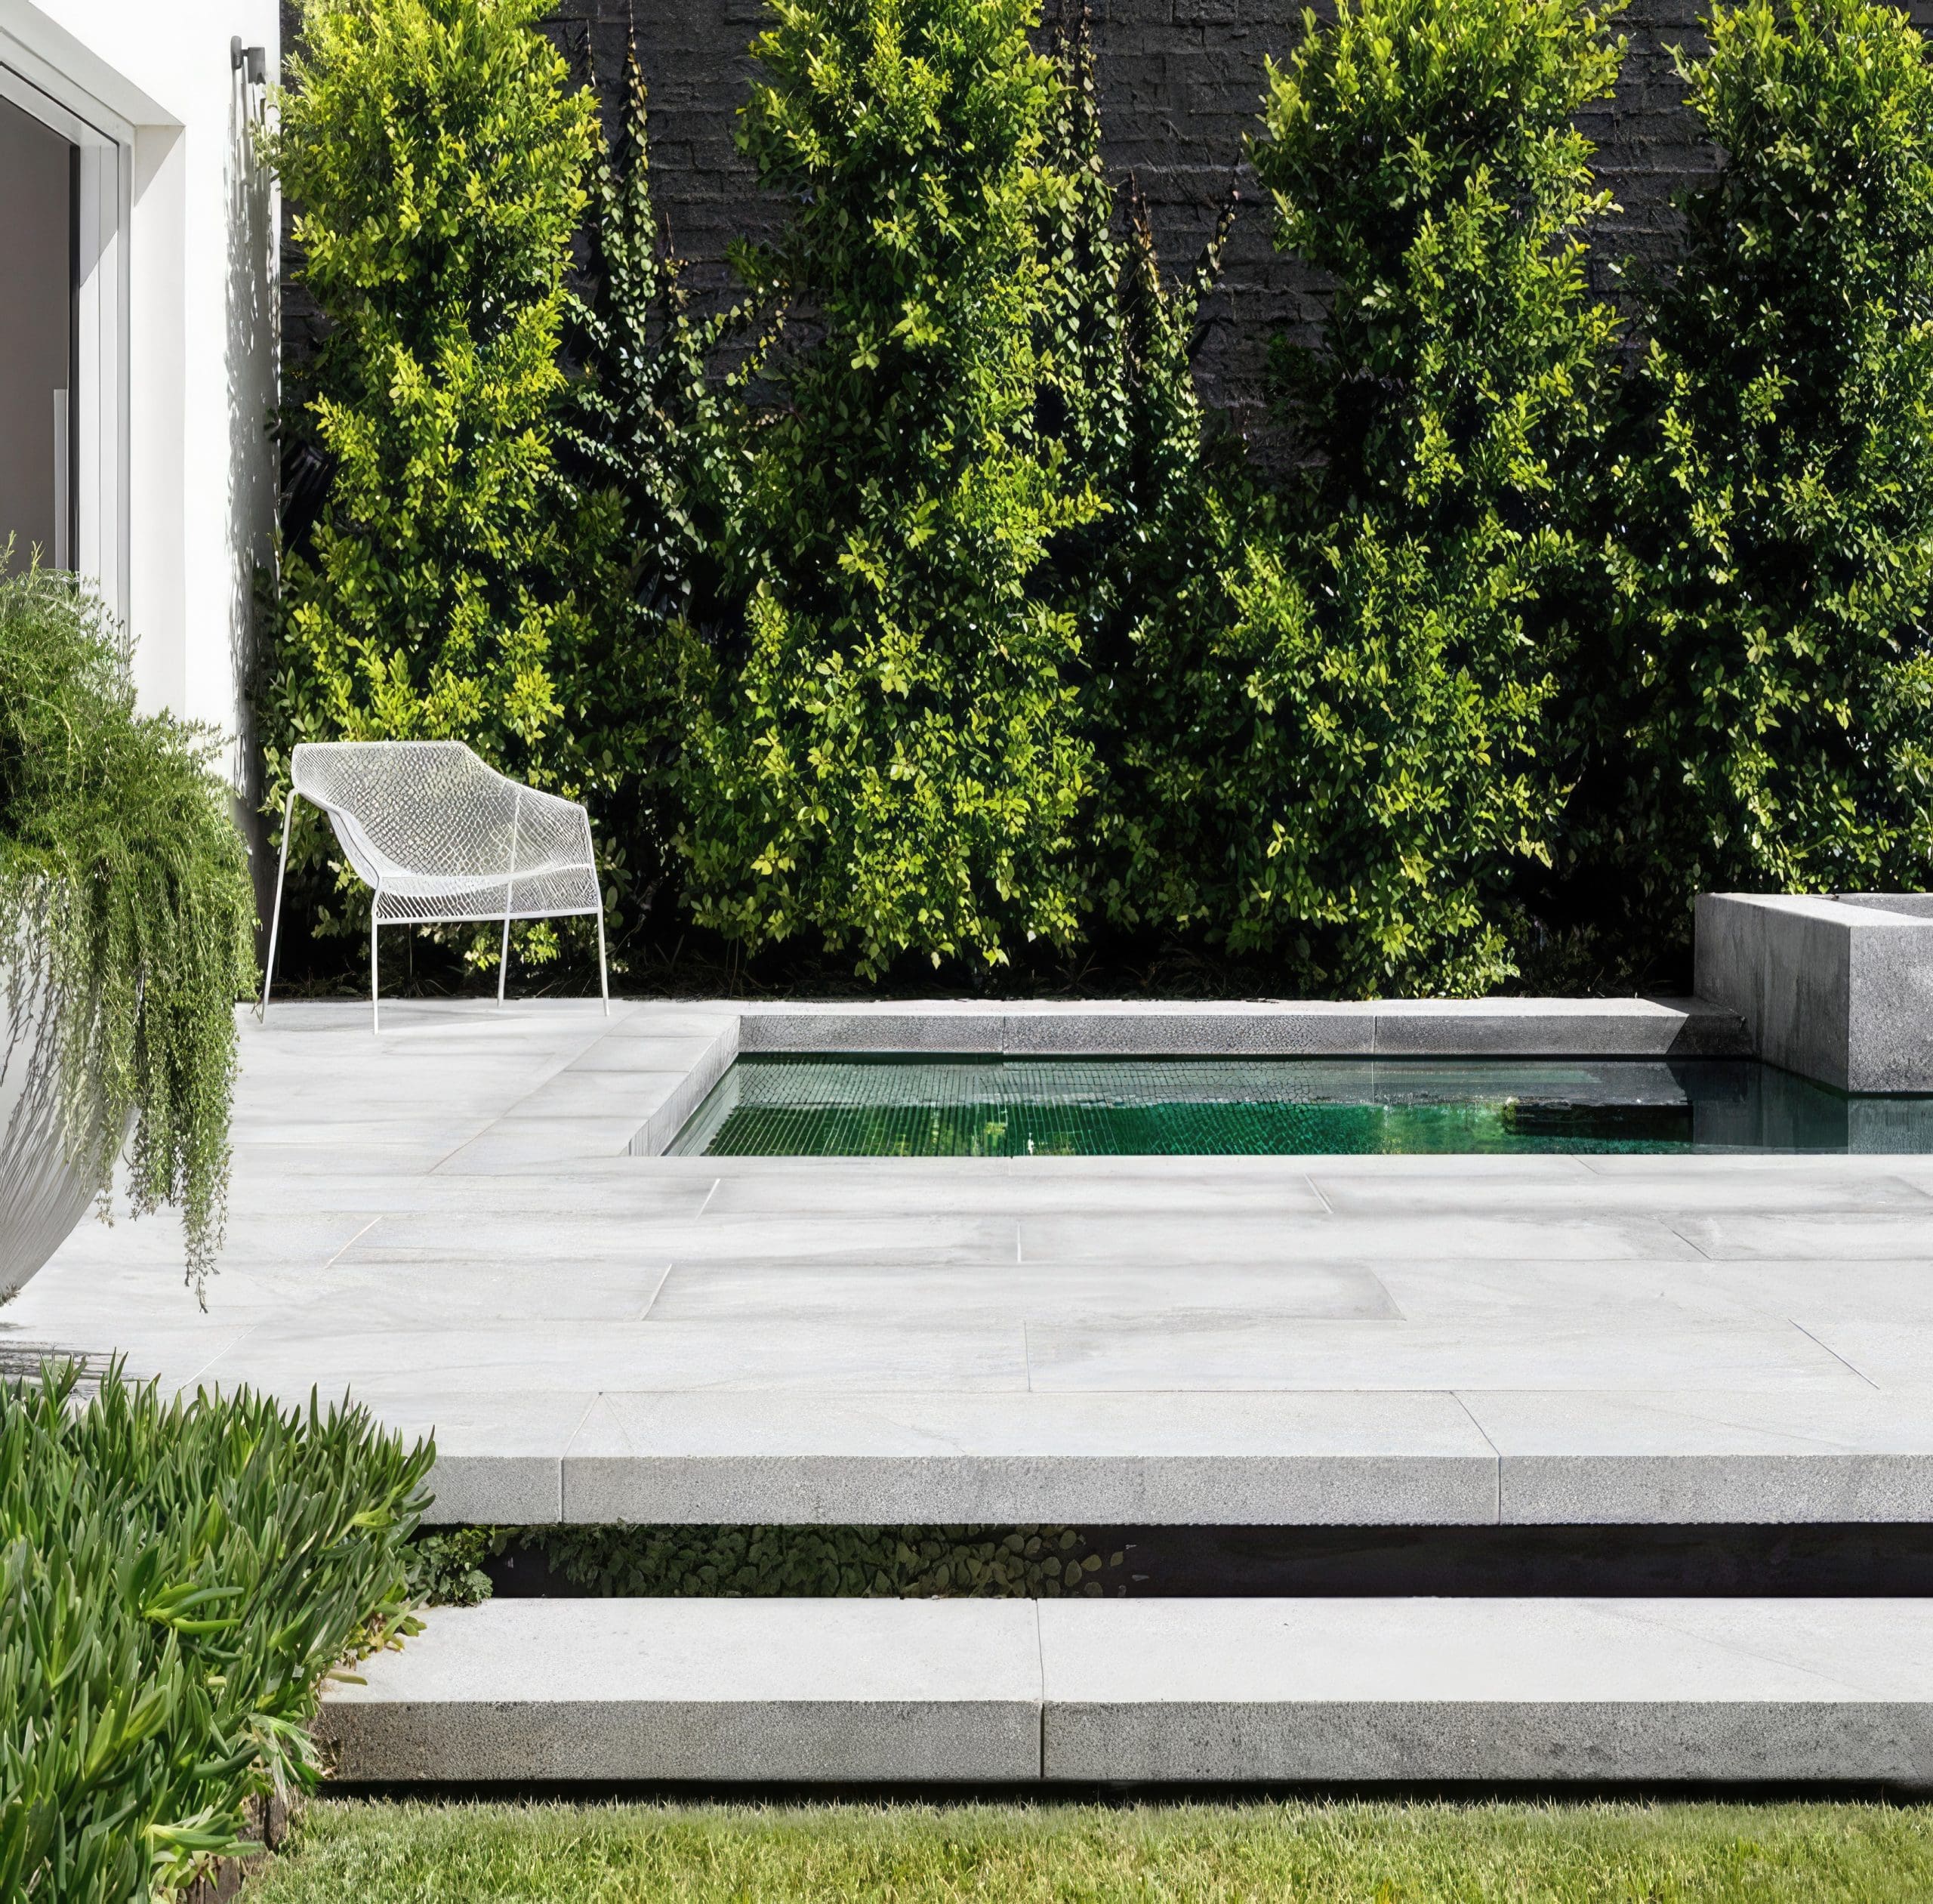 PORTSEA BLUE GRANITE_RMS TRADERS_NATURAL STONE PAVER POOL COPING SUPPLIER MELBOURNE (12)-gigapixel-standard-scale-4_00x